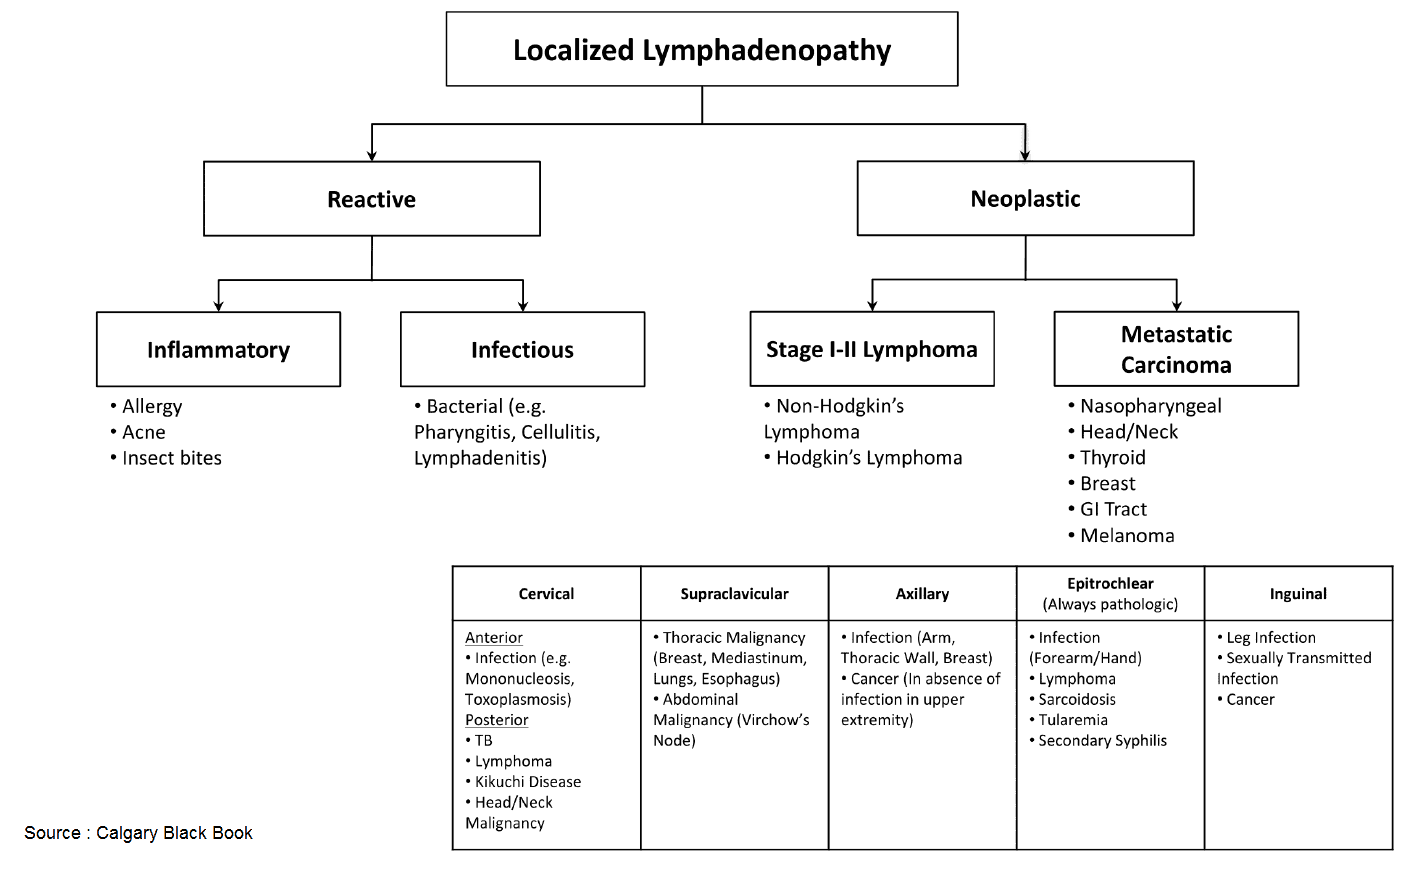 Causes of Localized Lymphadenopathy